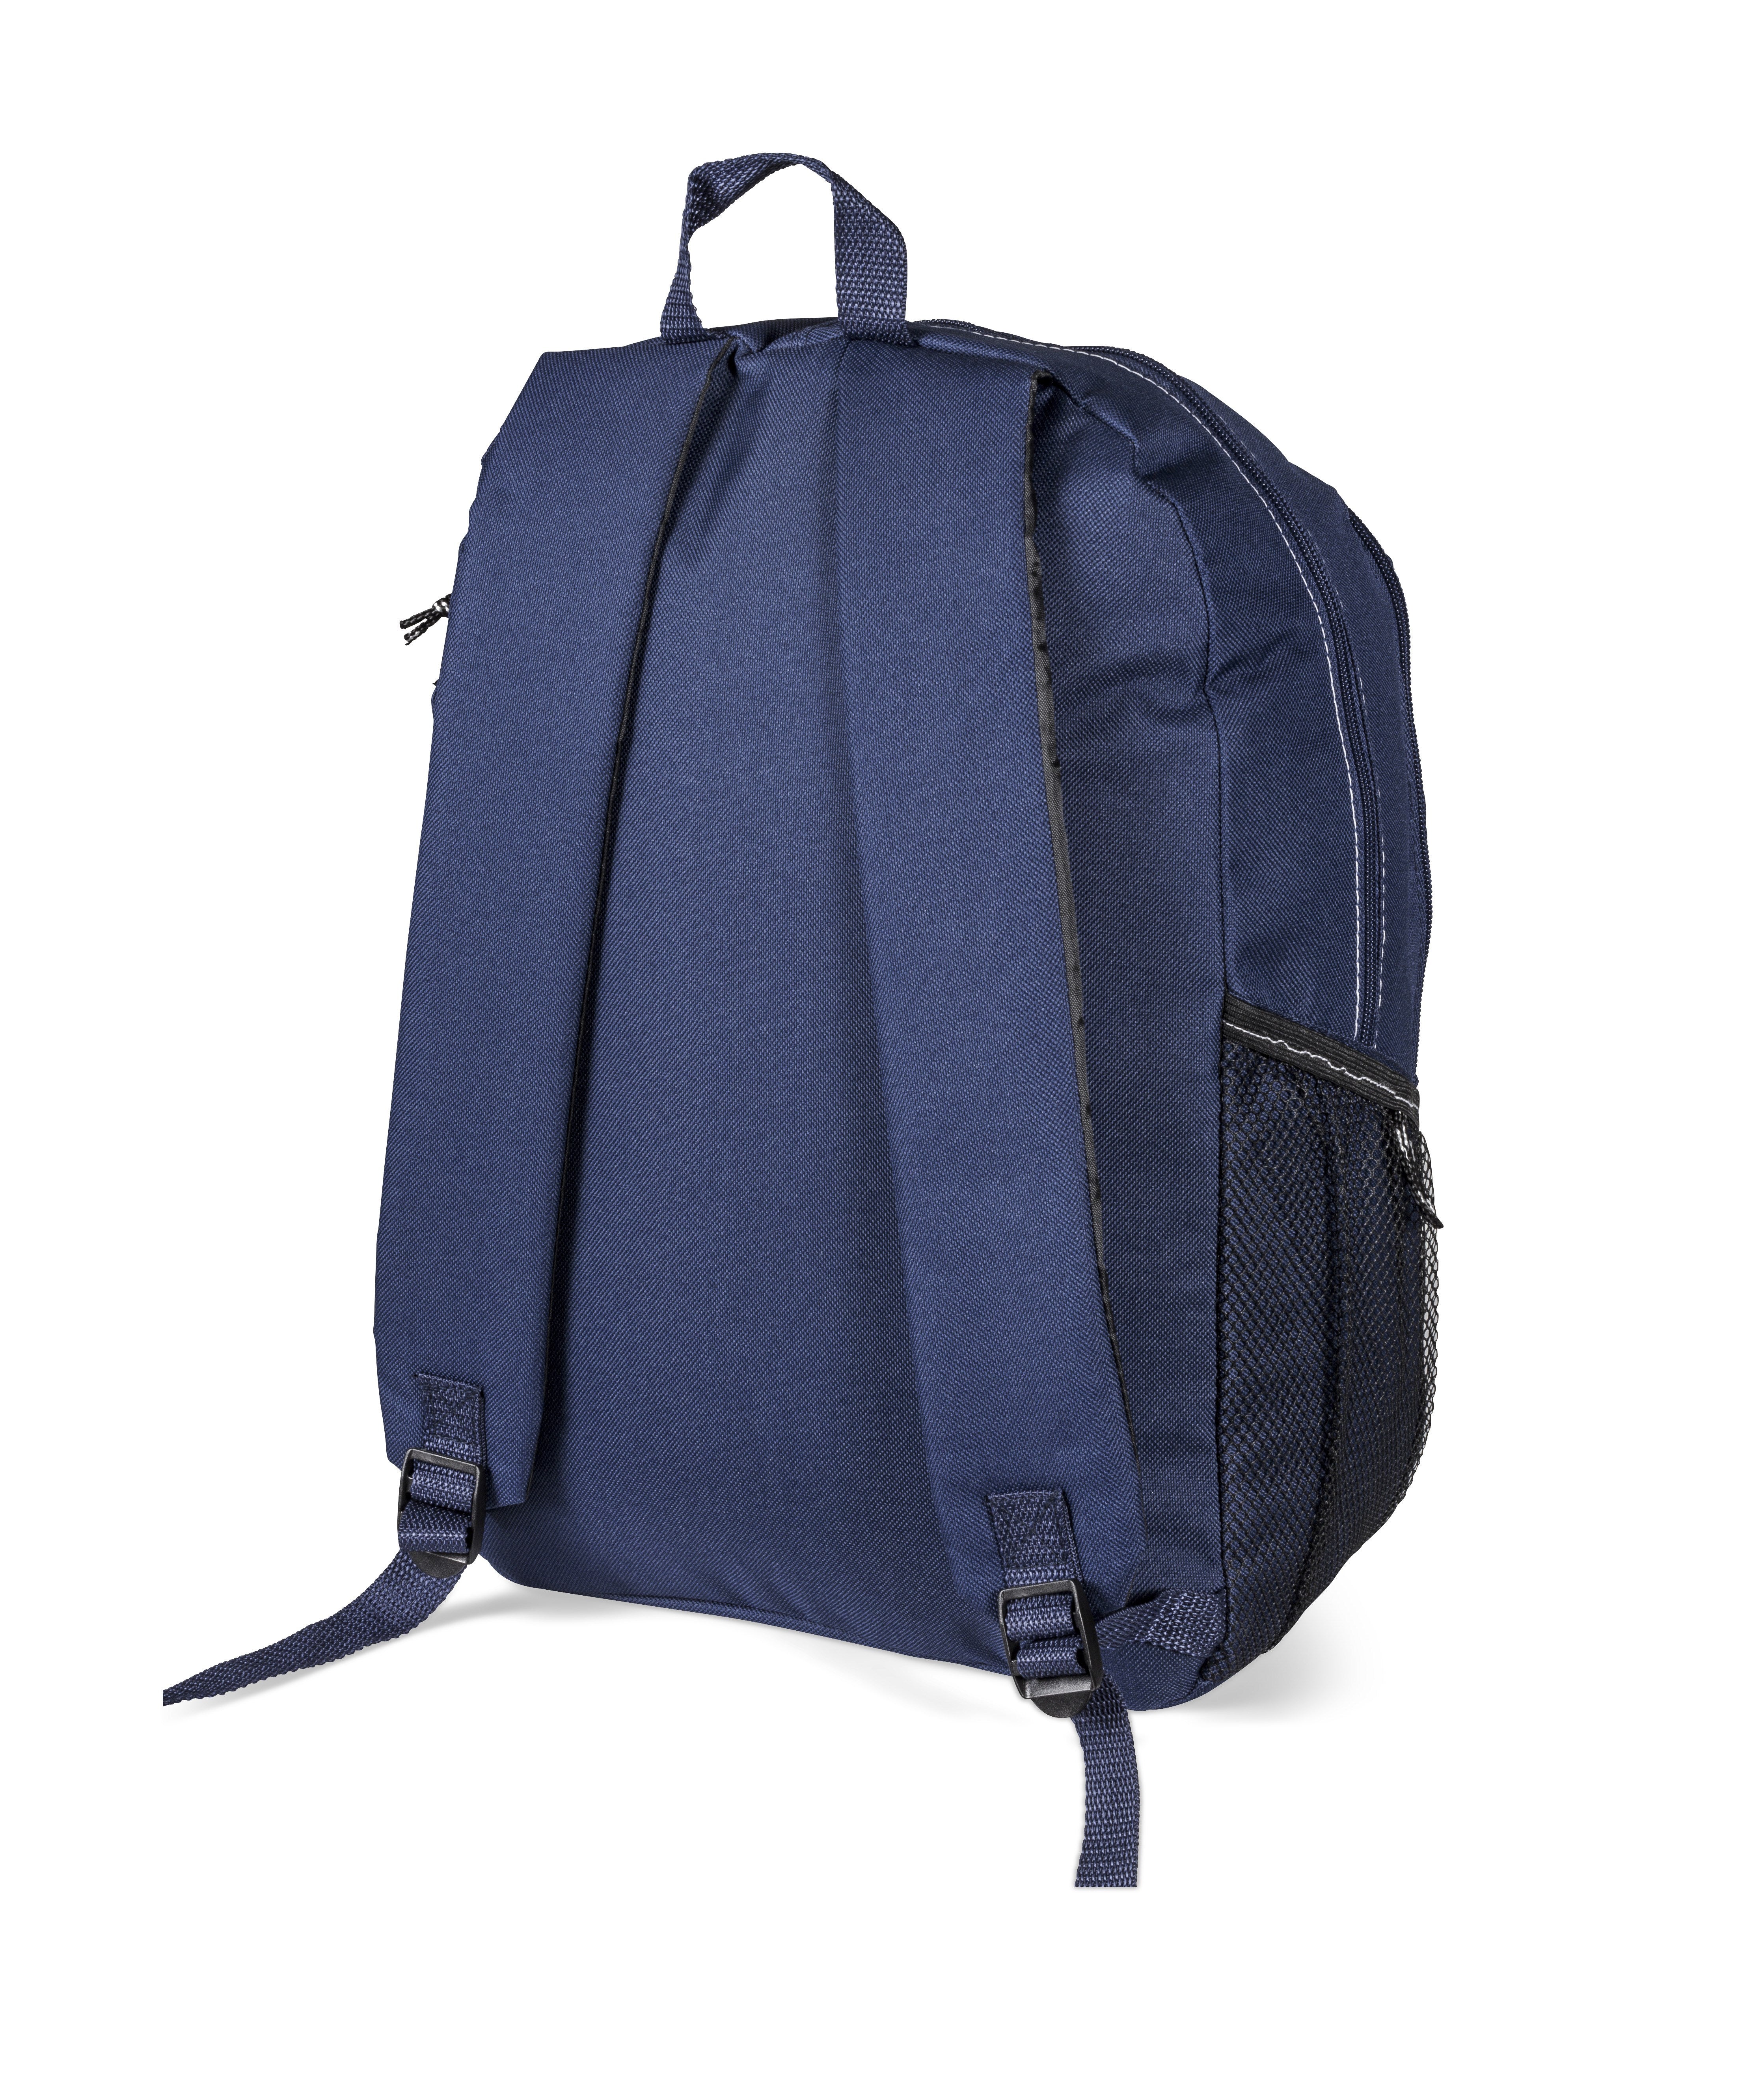 Two-Tone Laptop Backpack